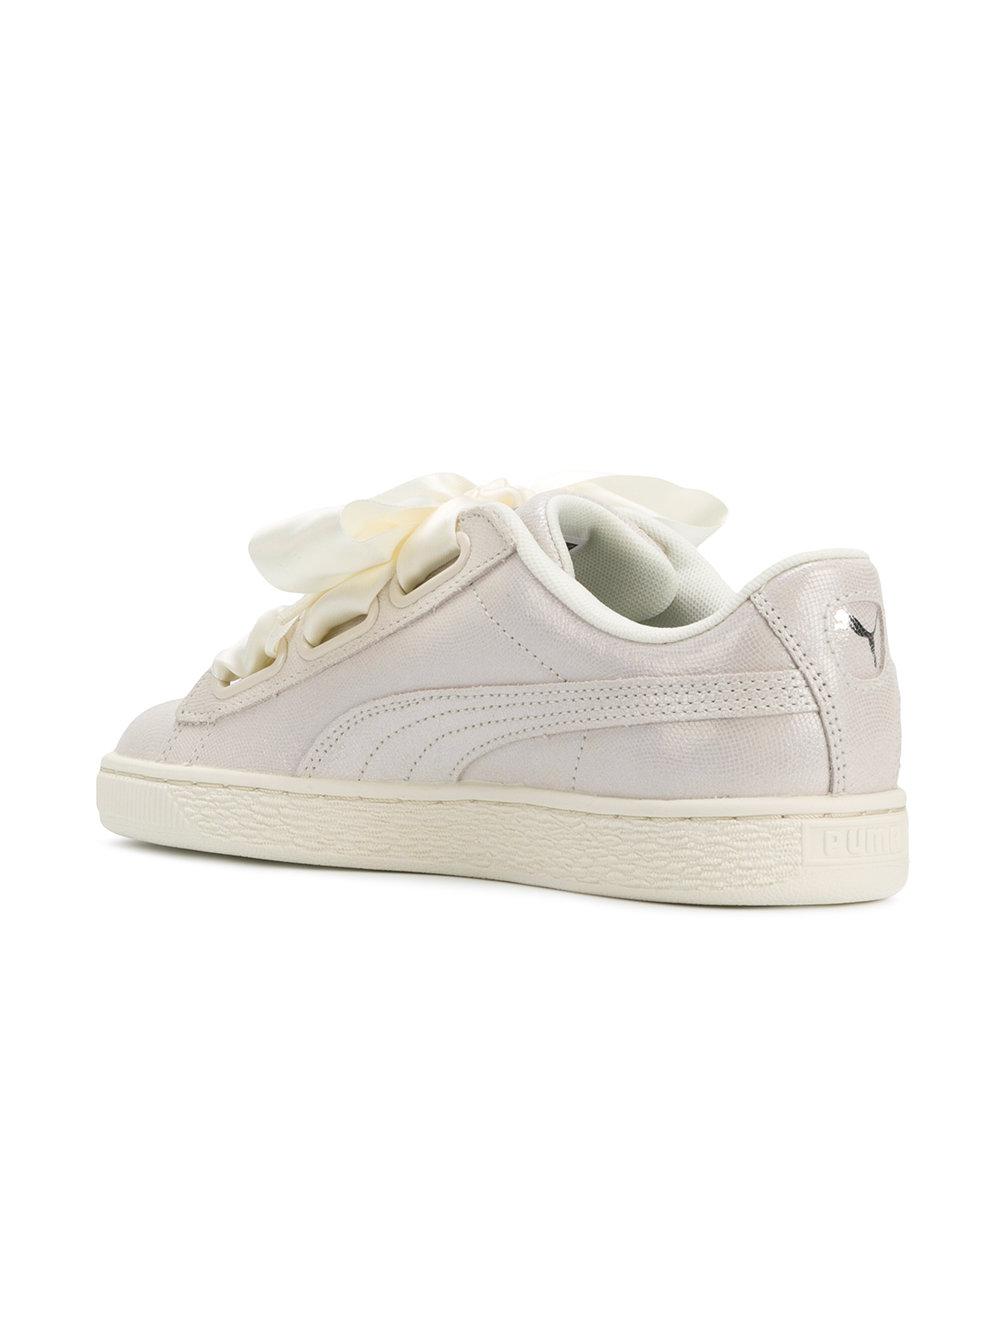 PUMA Leather Lace-up Ribbon Sneakers in White | Lyst